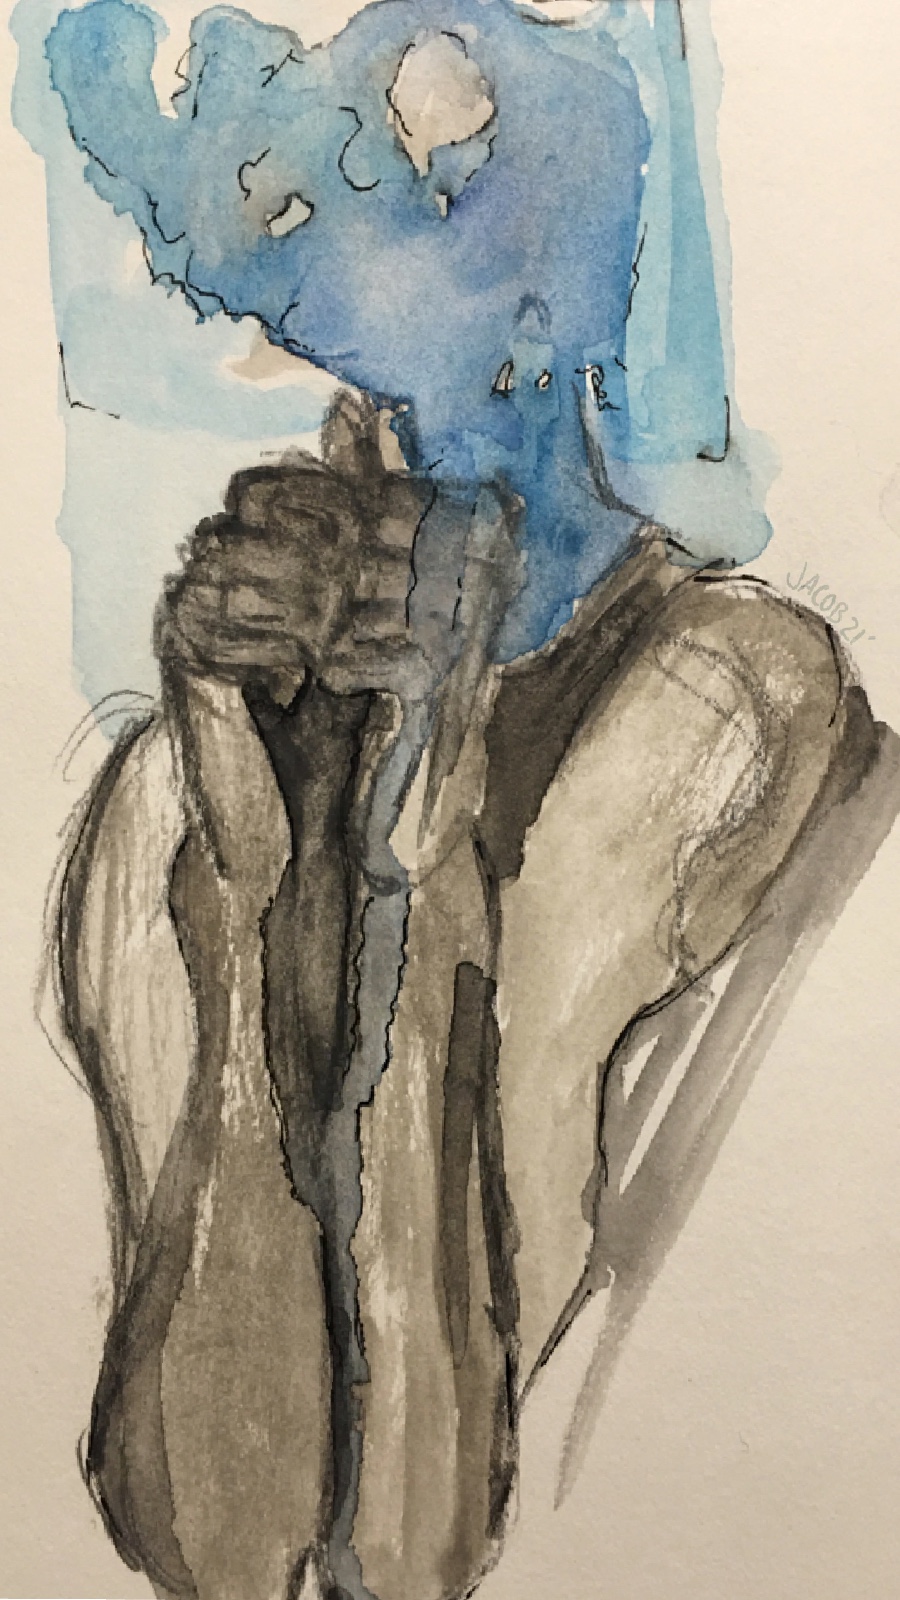 A human-like figure with a blue-painted head holds its two fists together in front of its chest